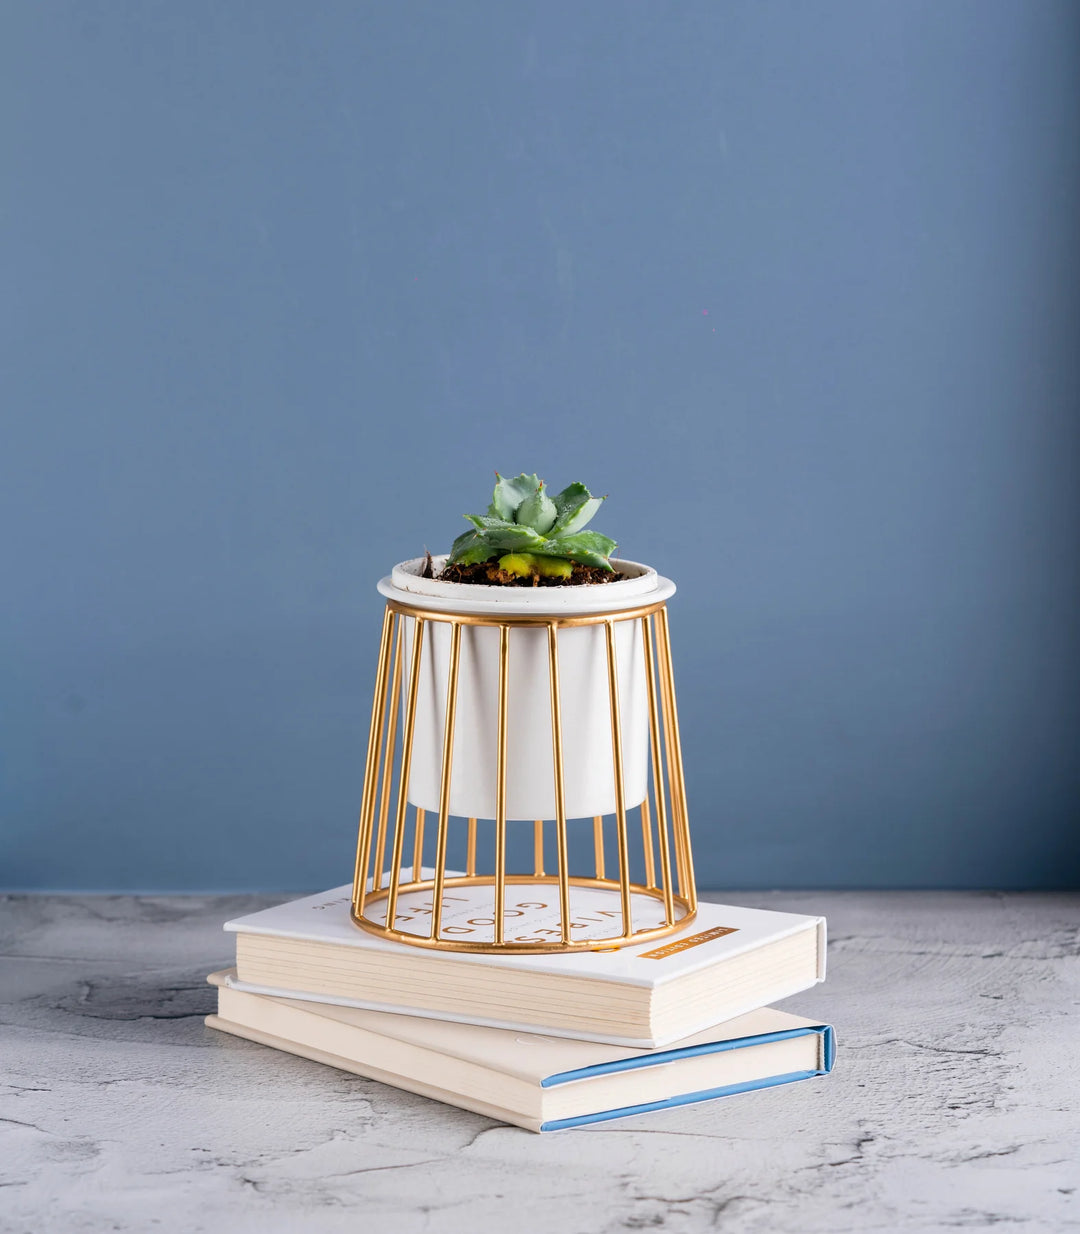 Gold Plant Stands | Round & Conical Metallic Gold Ottoman Metal Stands